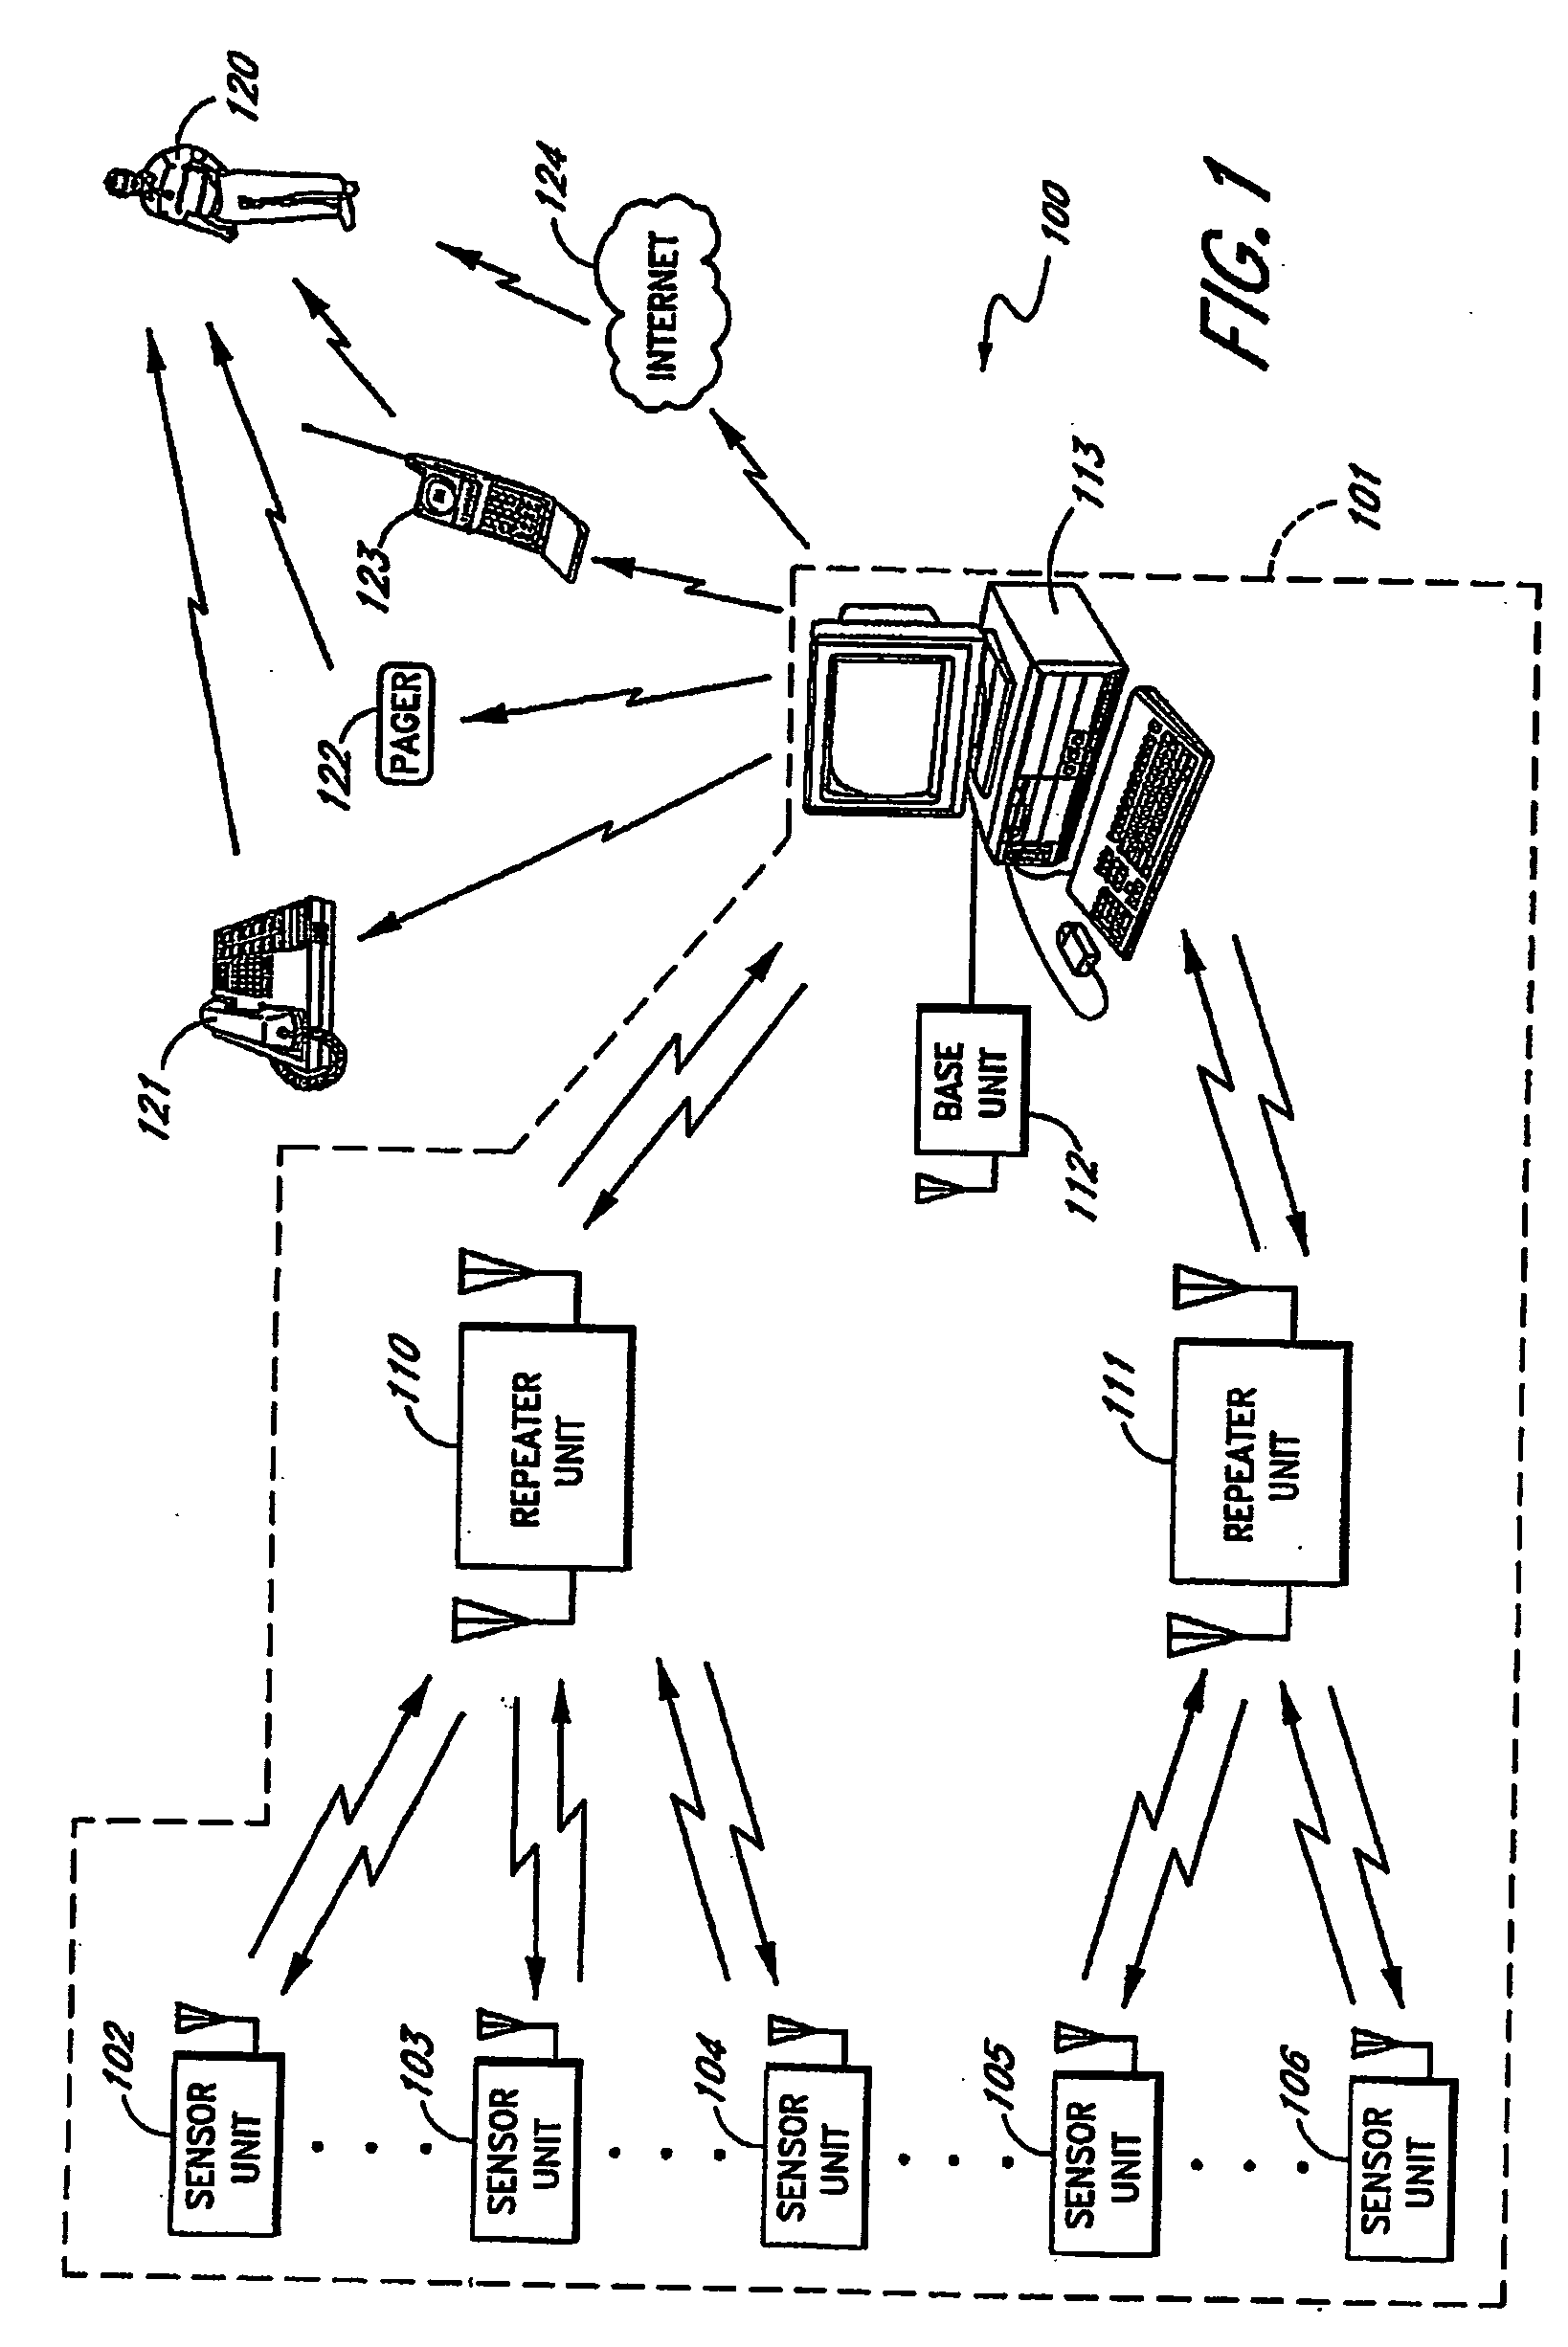 Wireless repeater for sensor system